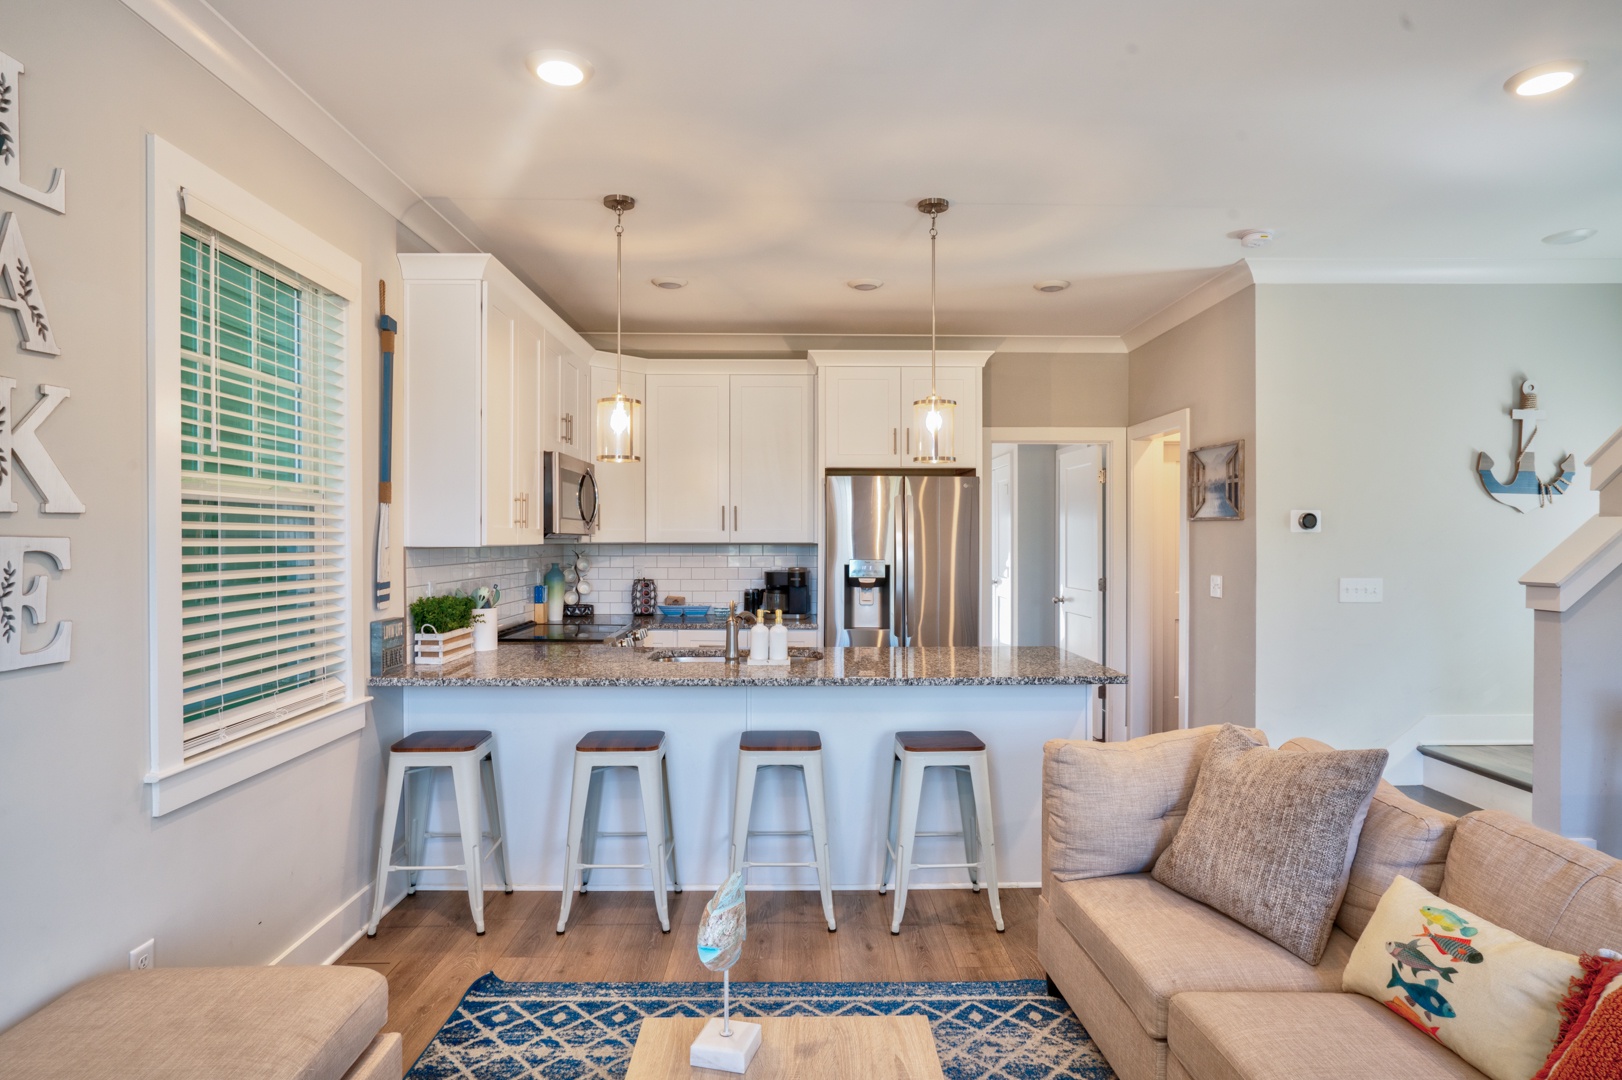 Sip morning coffee or grab a bite at the kitchen counter, with space for 4